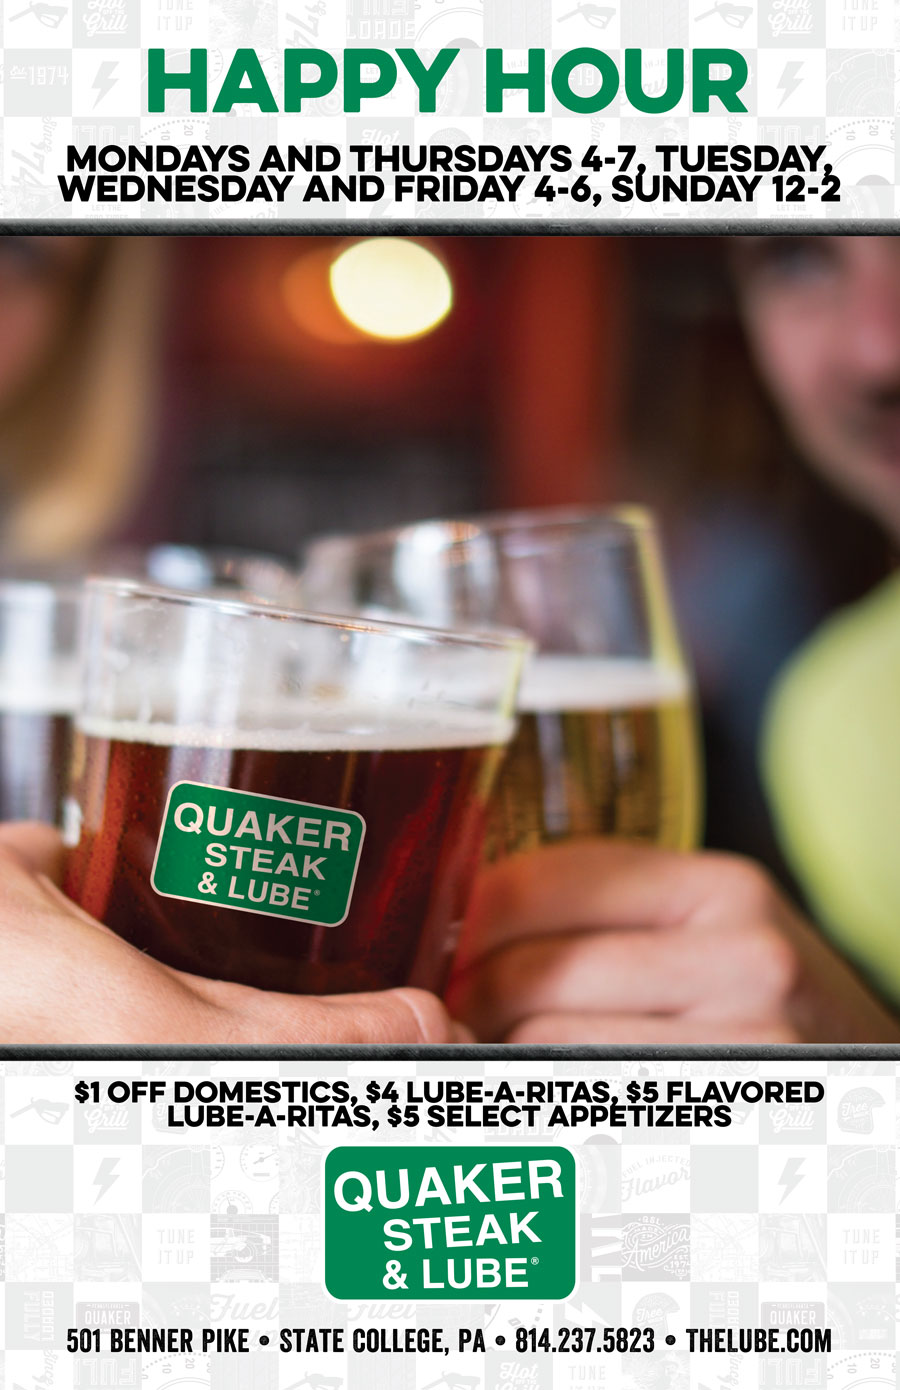 Happy Hour At the Quaker Steak & Lube State College, PA Restaurant